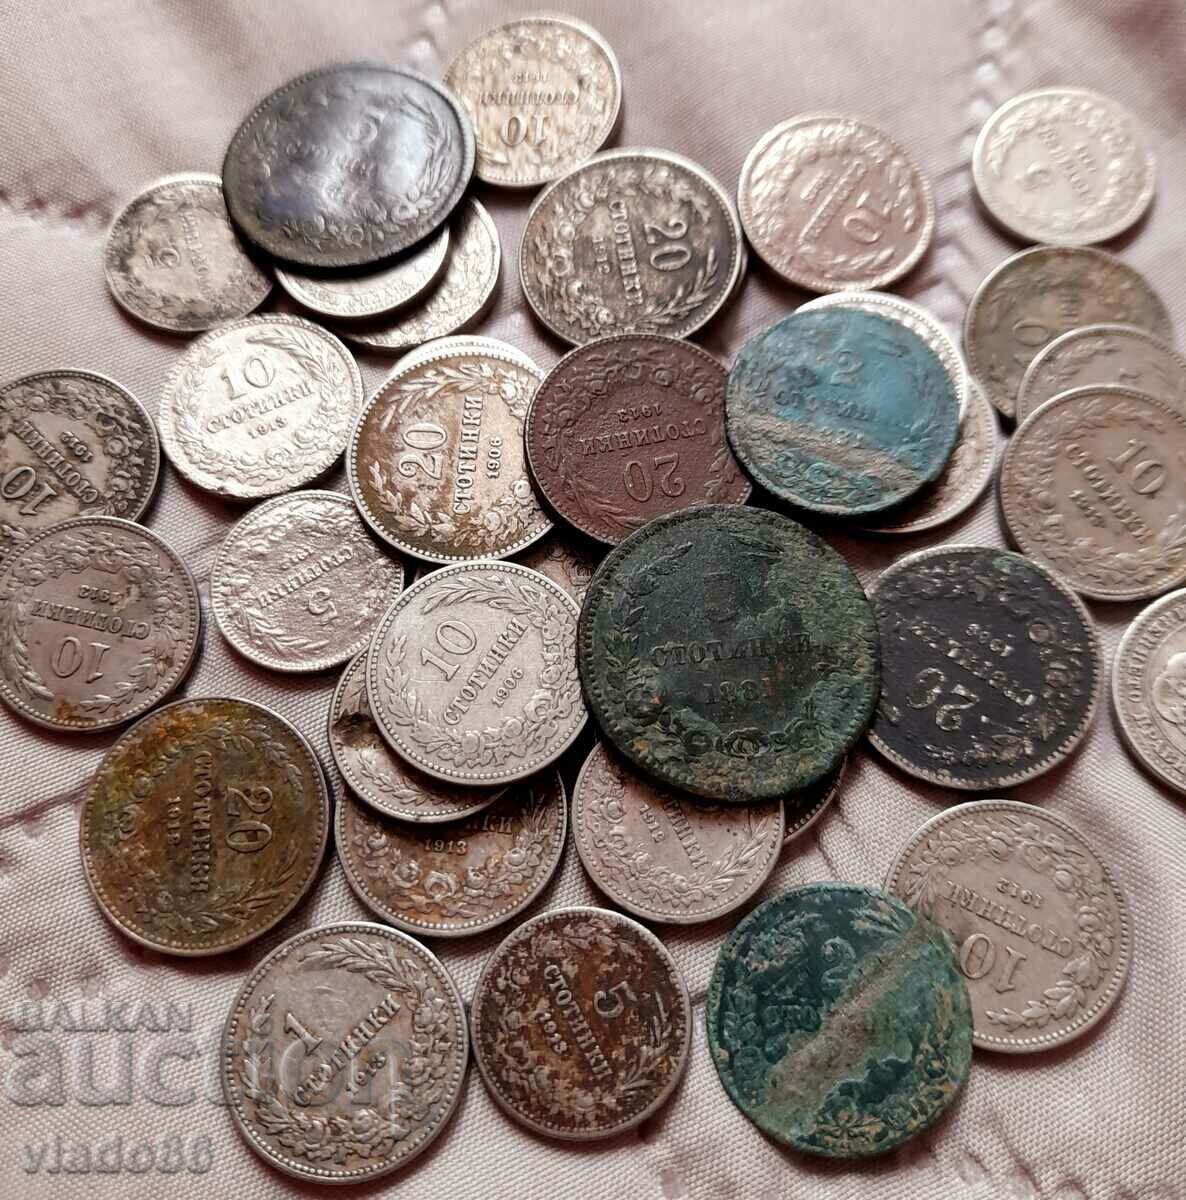 Lot of 1881, 1906, 1912 and 1913 pennies